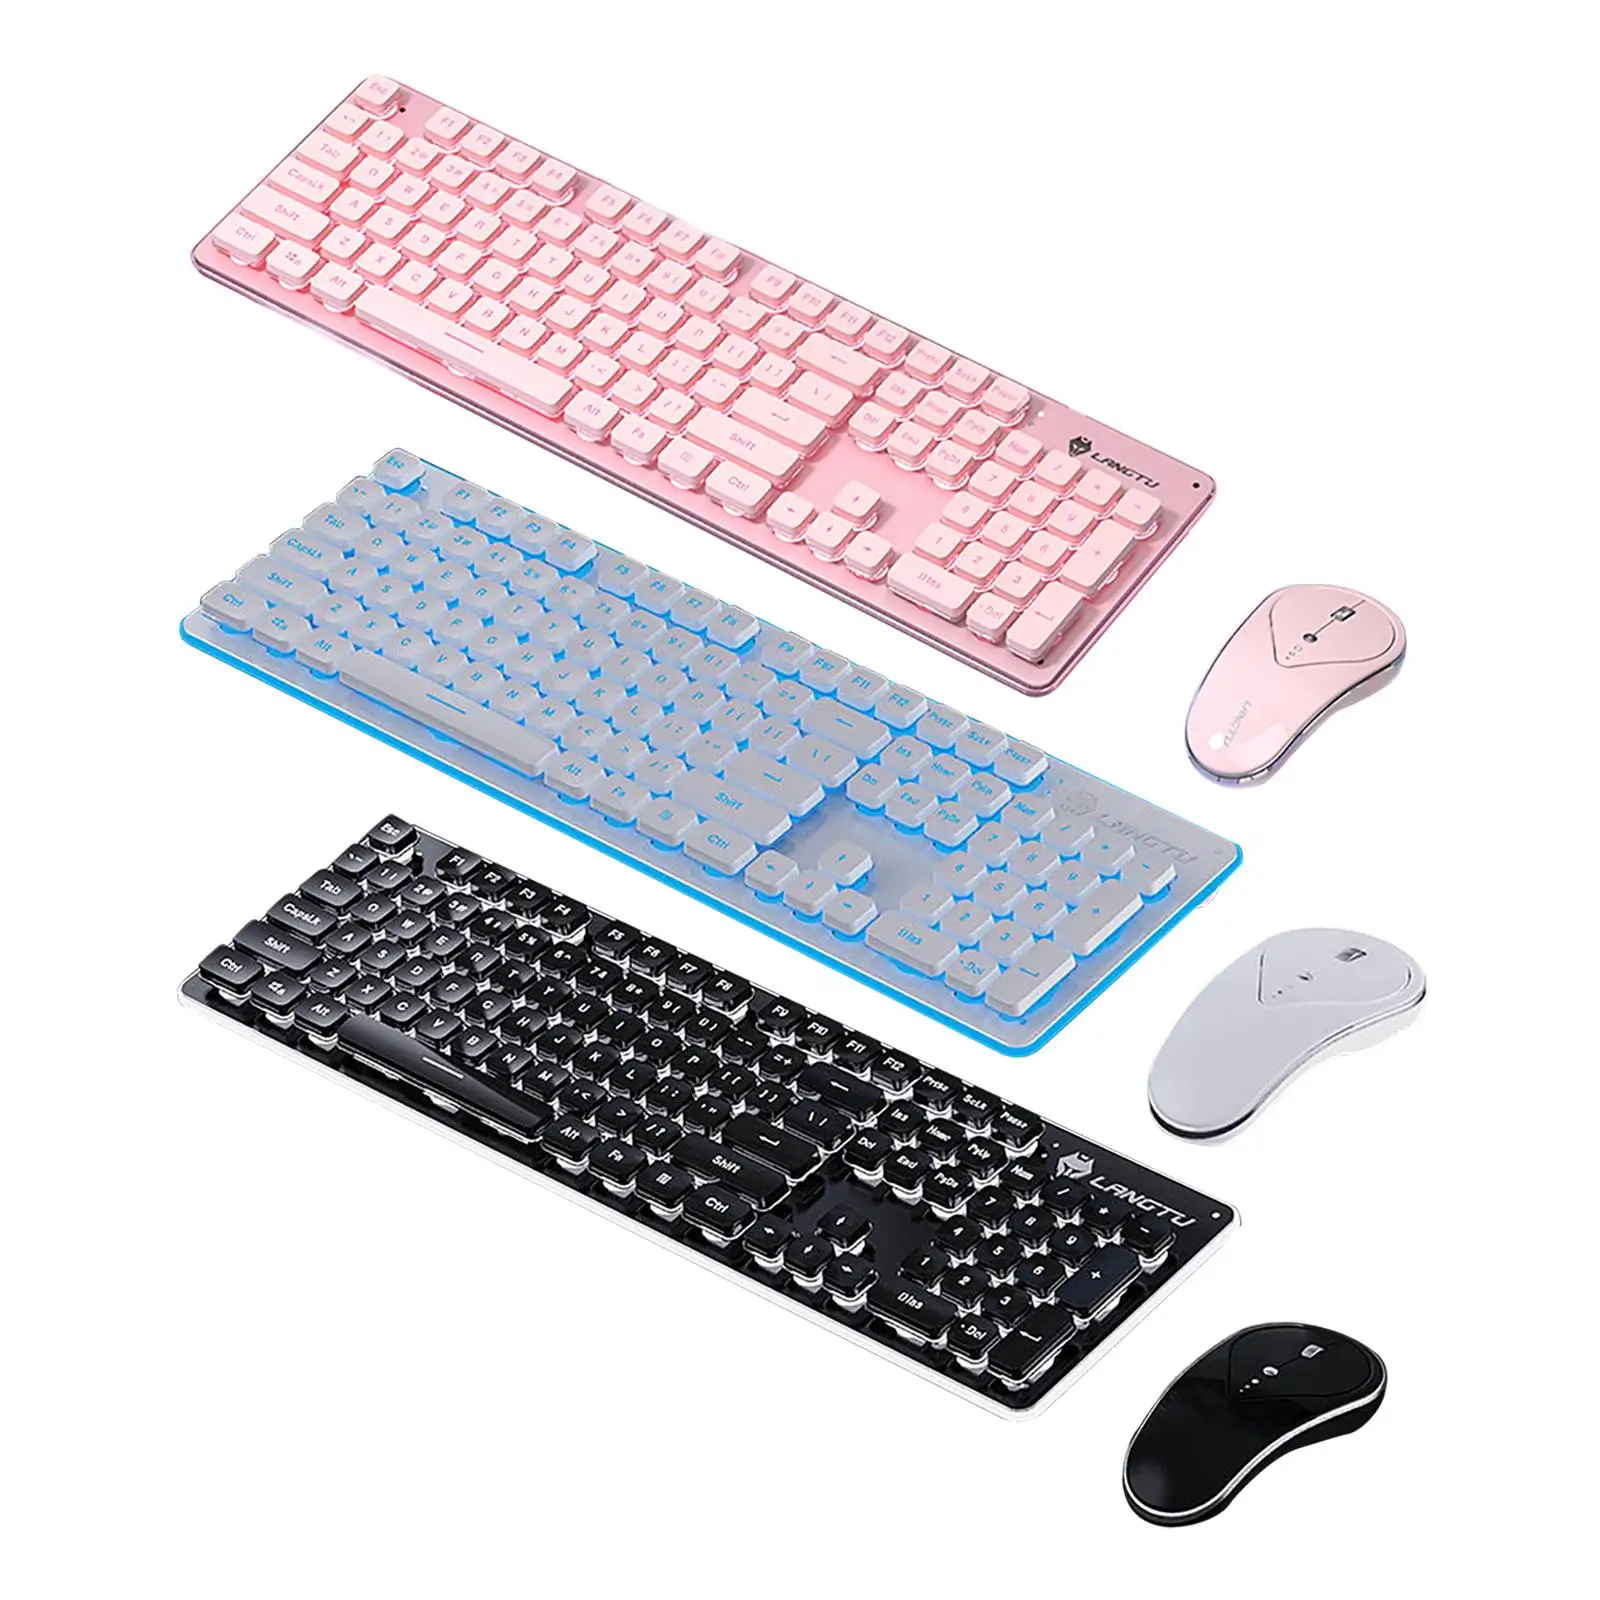 Compact 2.4G Wireless Keyboard Mouse Combo 104 Keys Ergonomic Shape Chocolate Keycaps Keyboard Mouse Set for Notebook Computer